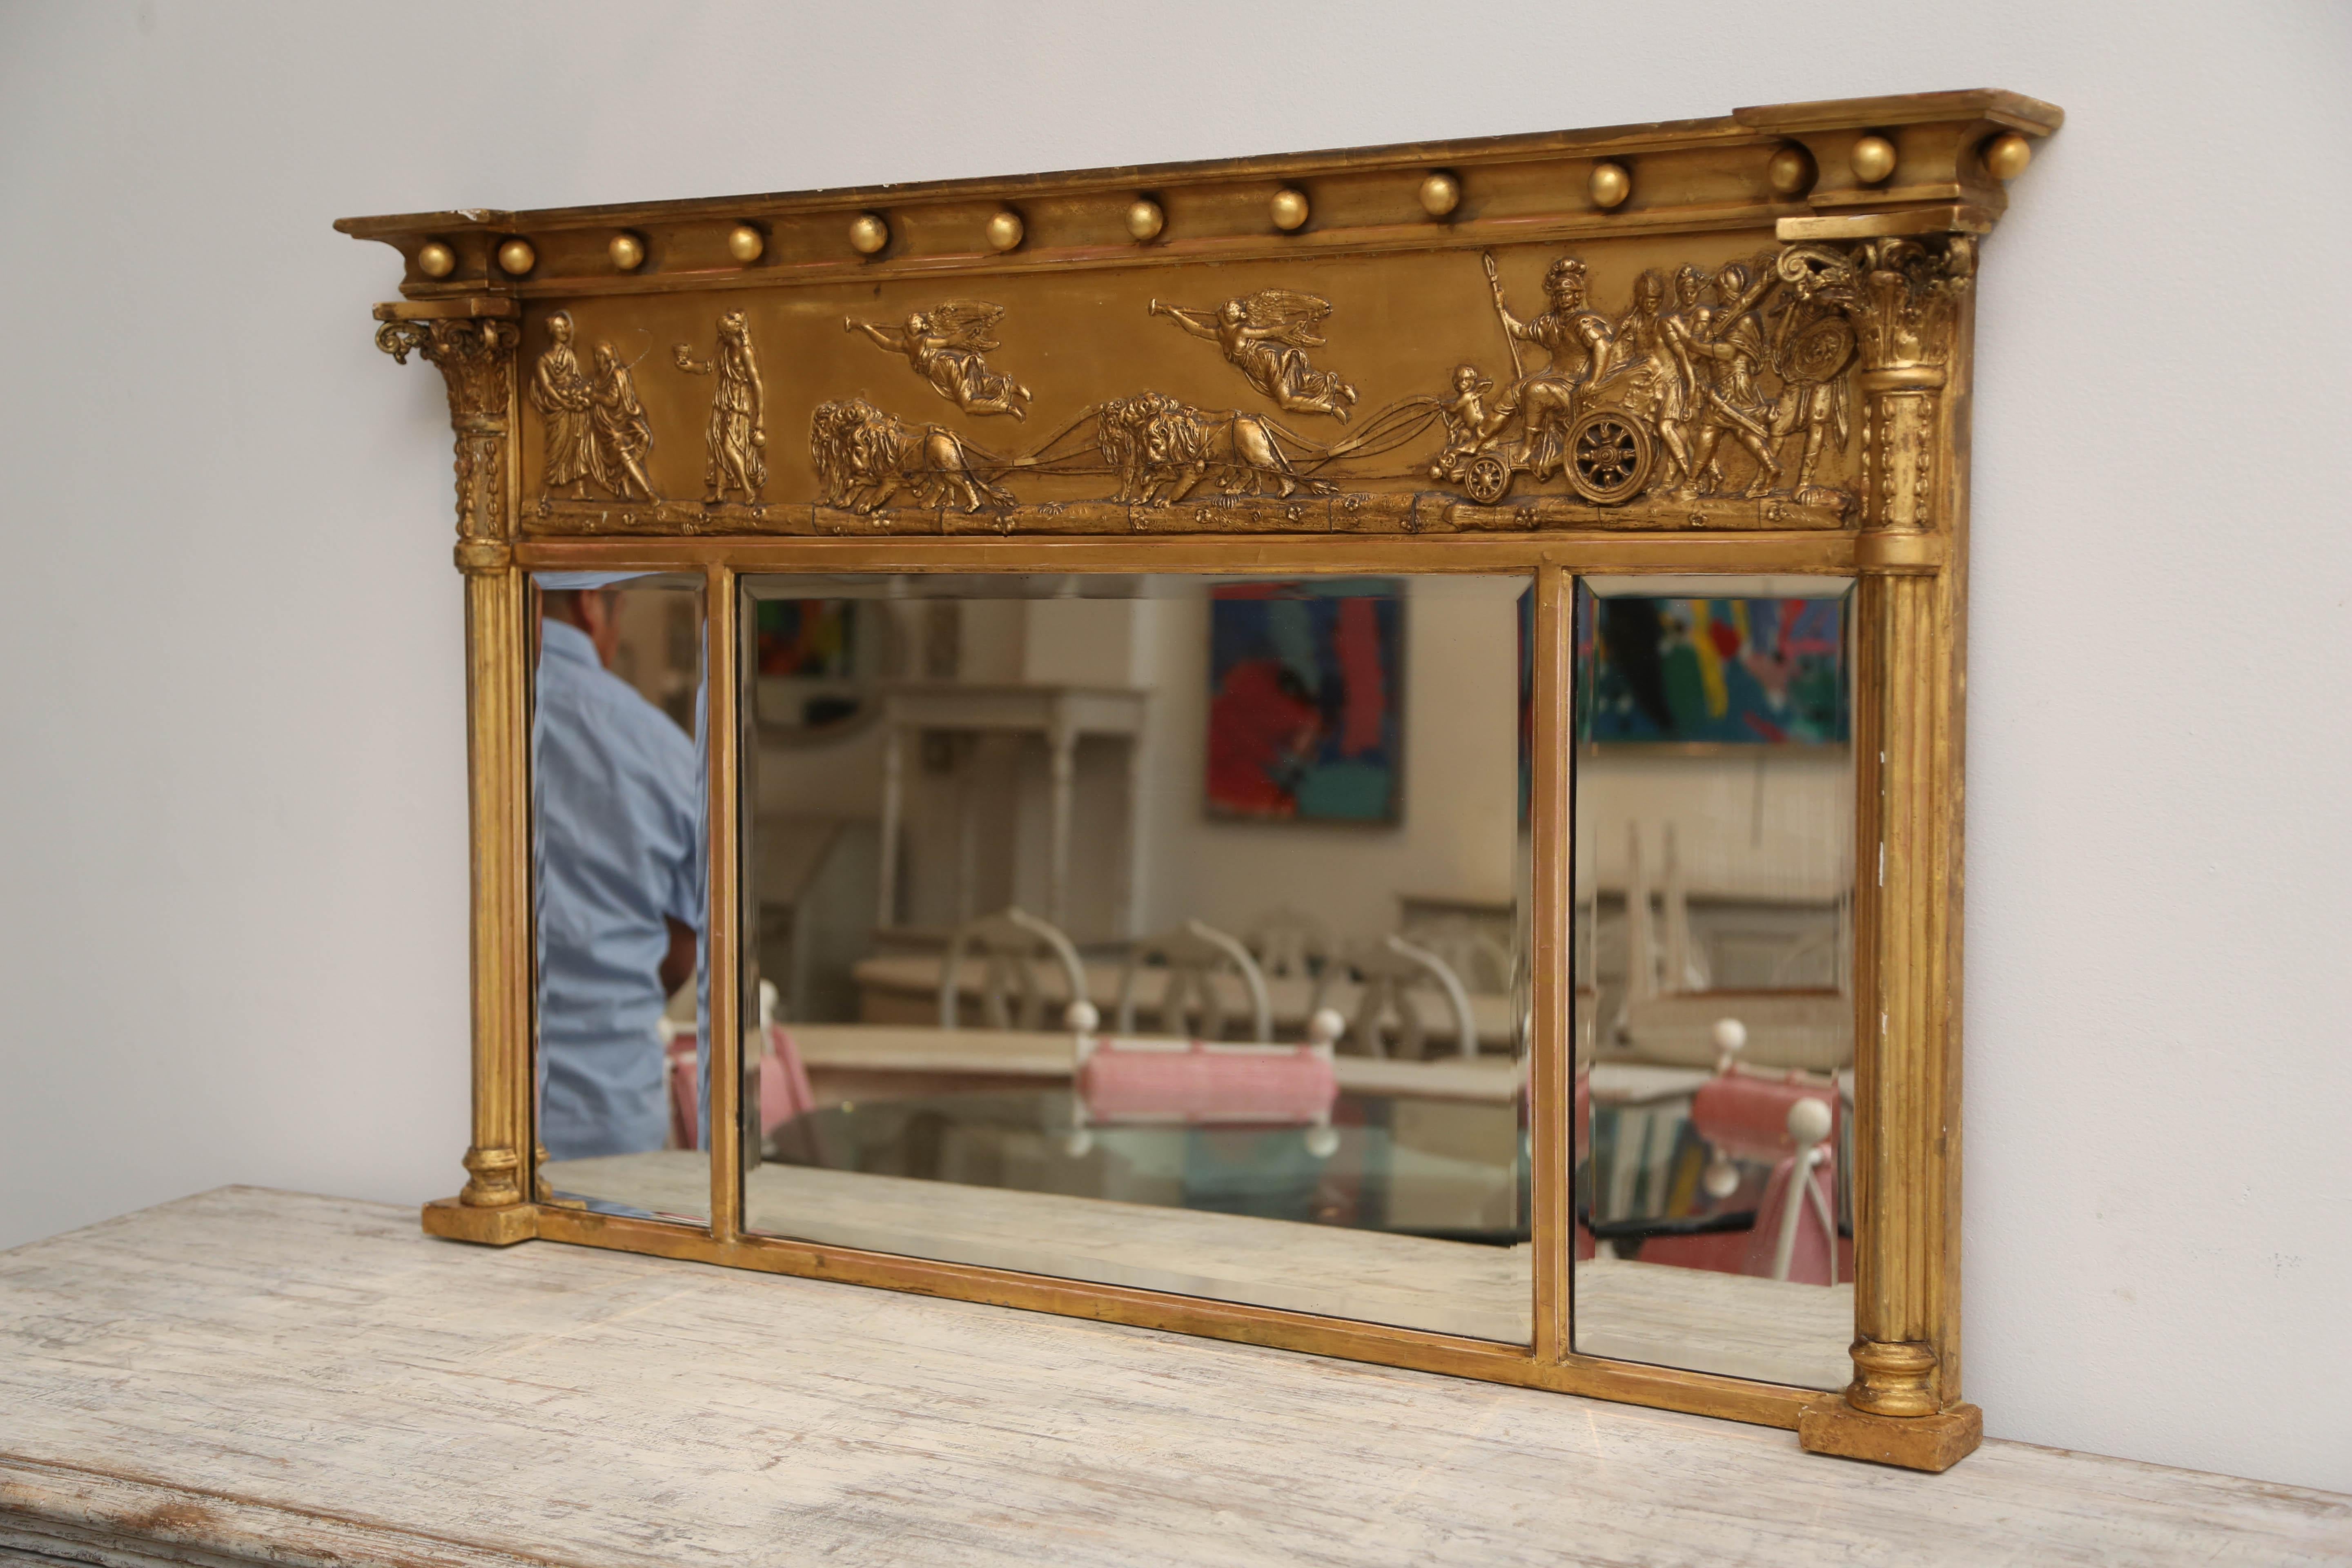 Antique Swedish neoclassic giltwood overmantel mirror. The classical top with a concave section and gilded balls above an apron with beautiful carvings of a warrior in his chariot pulled by lions and escorted by flying angels. The ends have half